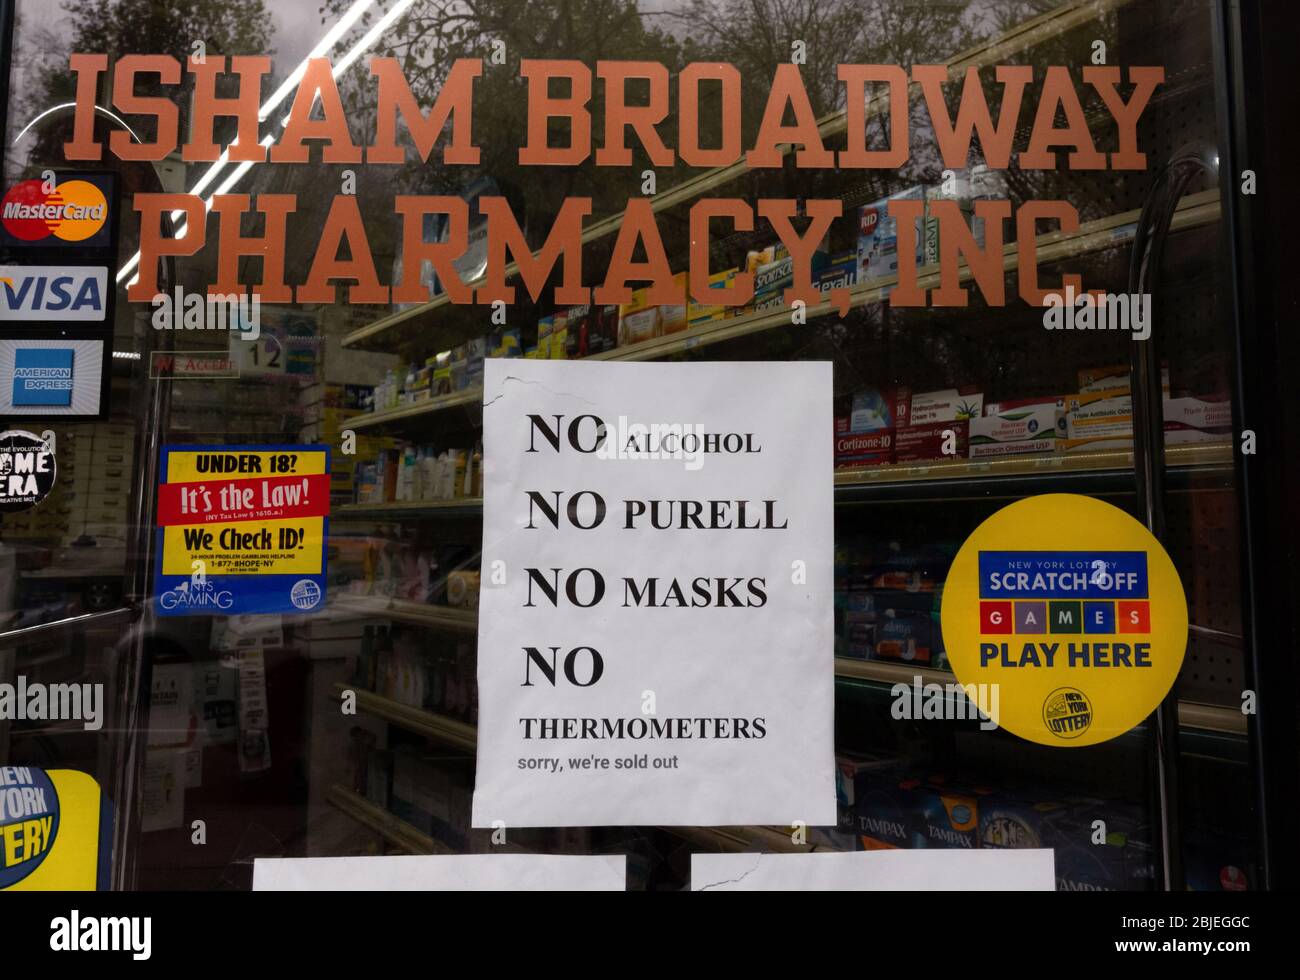 due to shortages in the coronavirus or covid-19 pandemic a pharmacy sign states it has no alcohol, no Purell, no masks, and no thermometers, Stock Photo